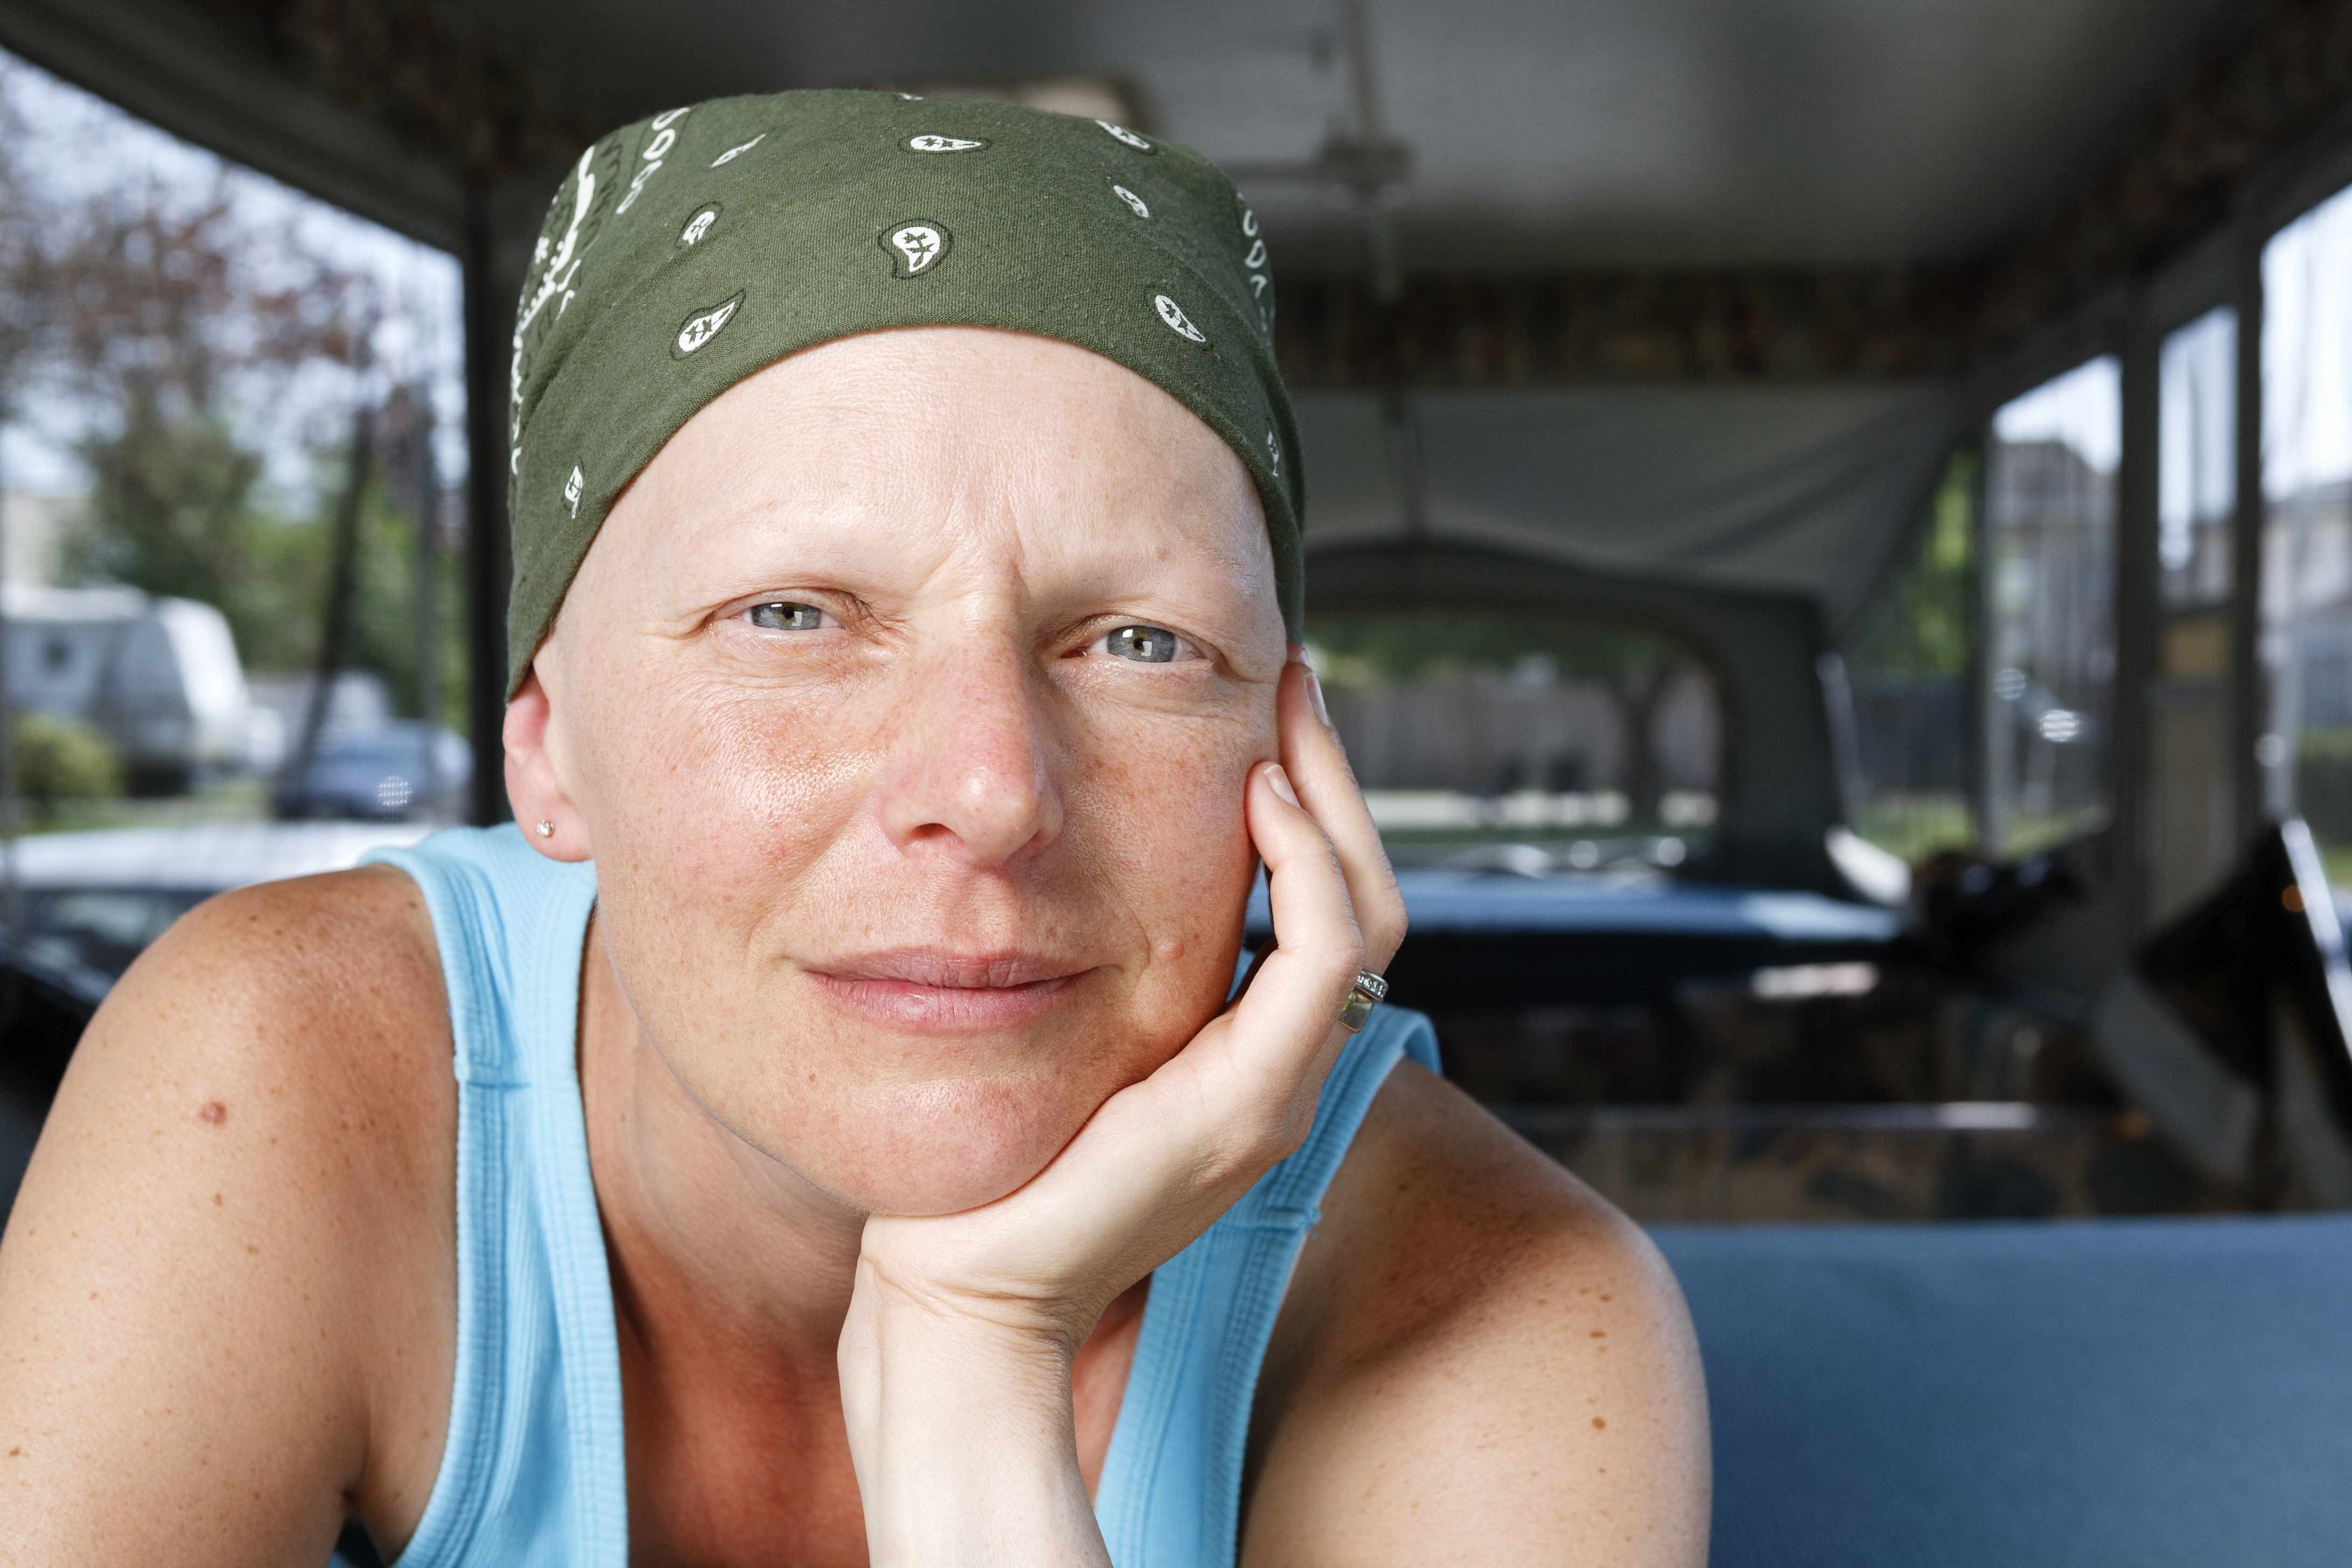 a woman with a headscarf, perhaps due to chemo therapy treatment for cancer, looking pensively into the camera